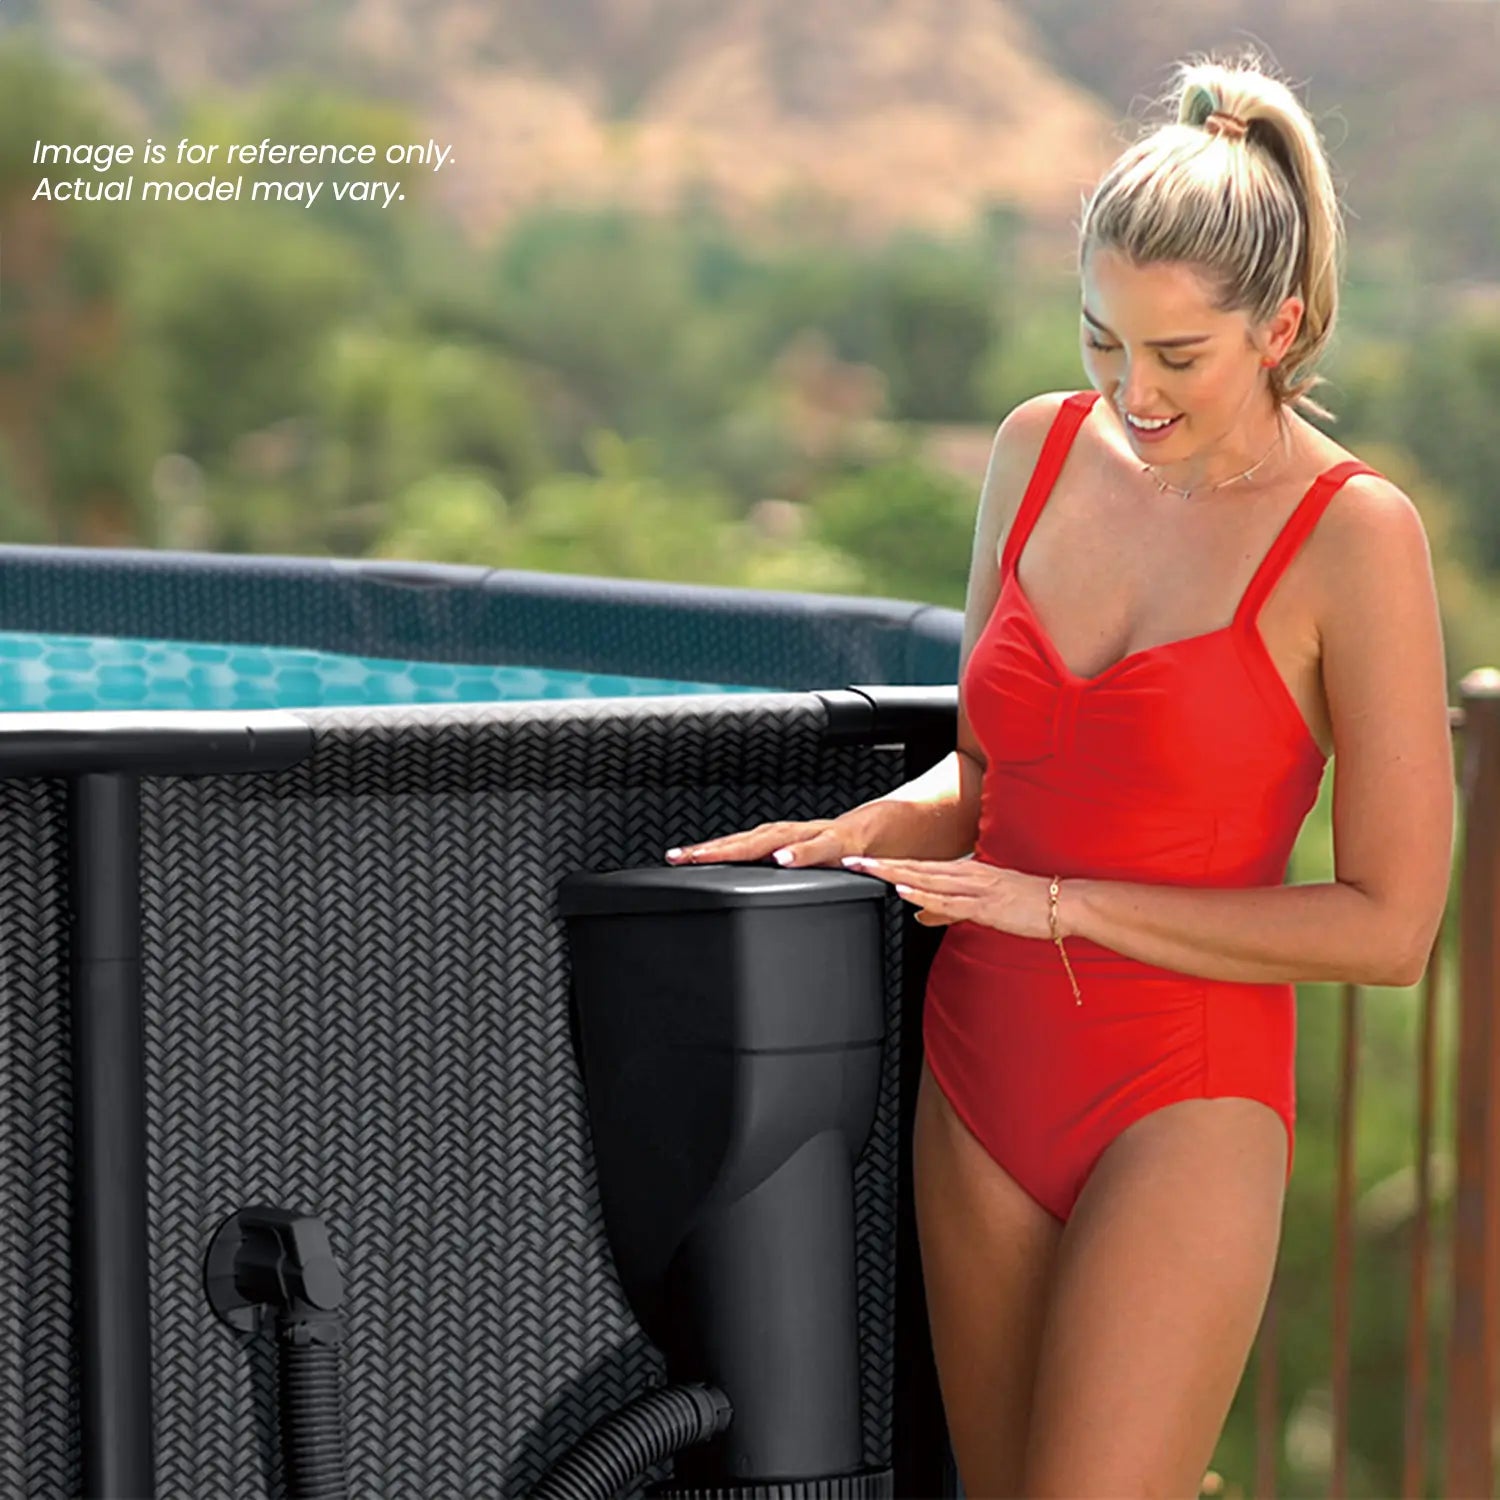 Funsicle SFX1500 SkimmerPlus Filter Pump attached to Funsicle Oasis Designer Pool with a model standing next to it